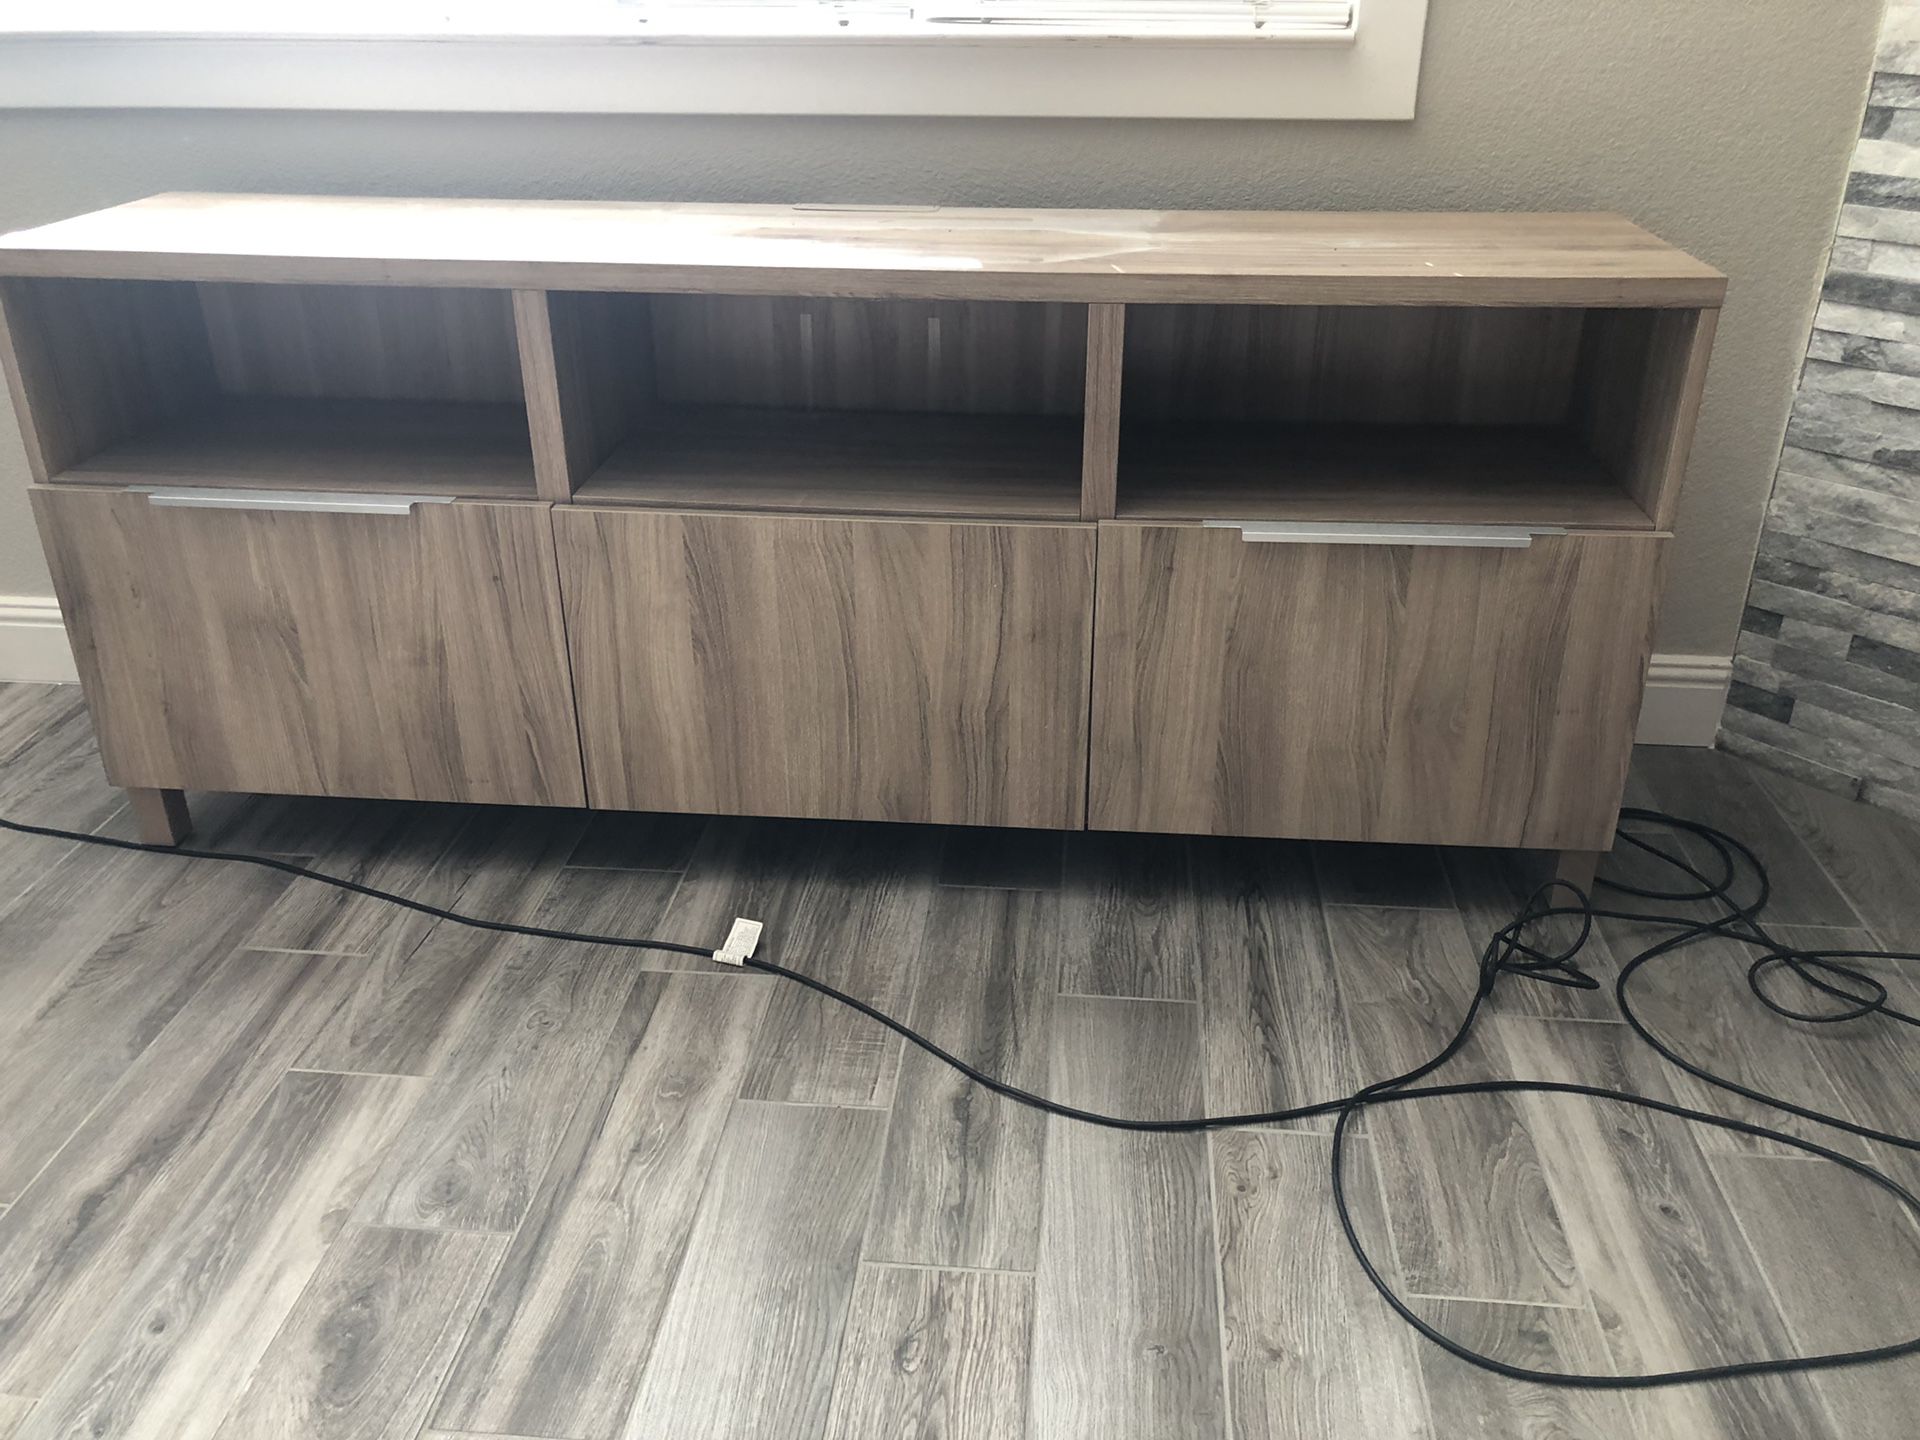 Entertainment Center from IKEA